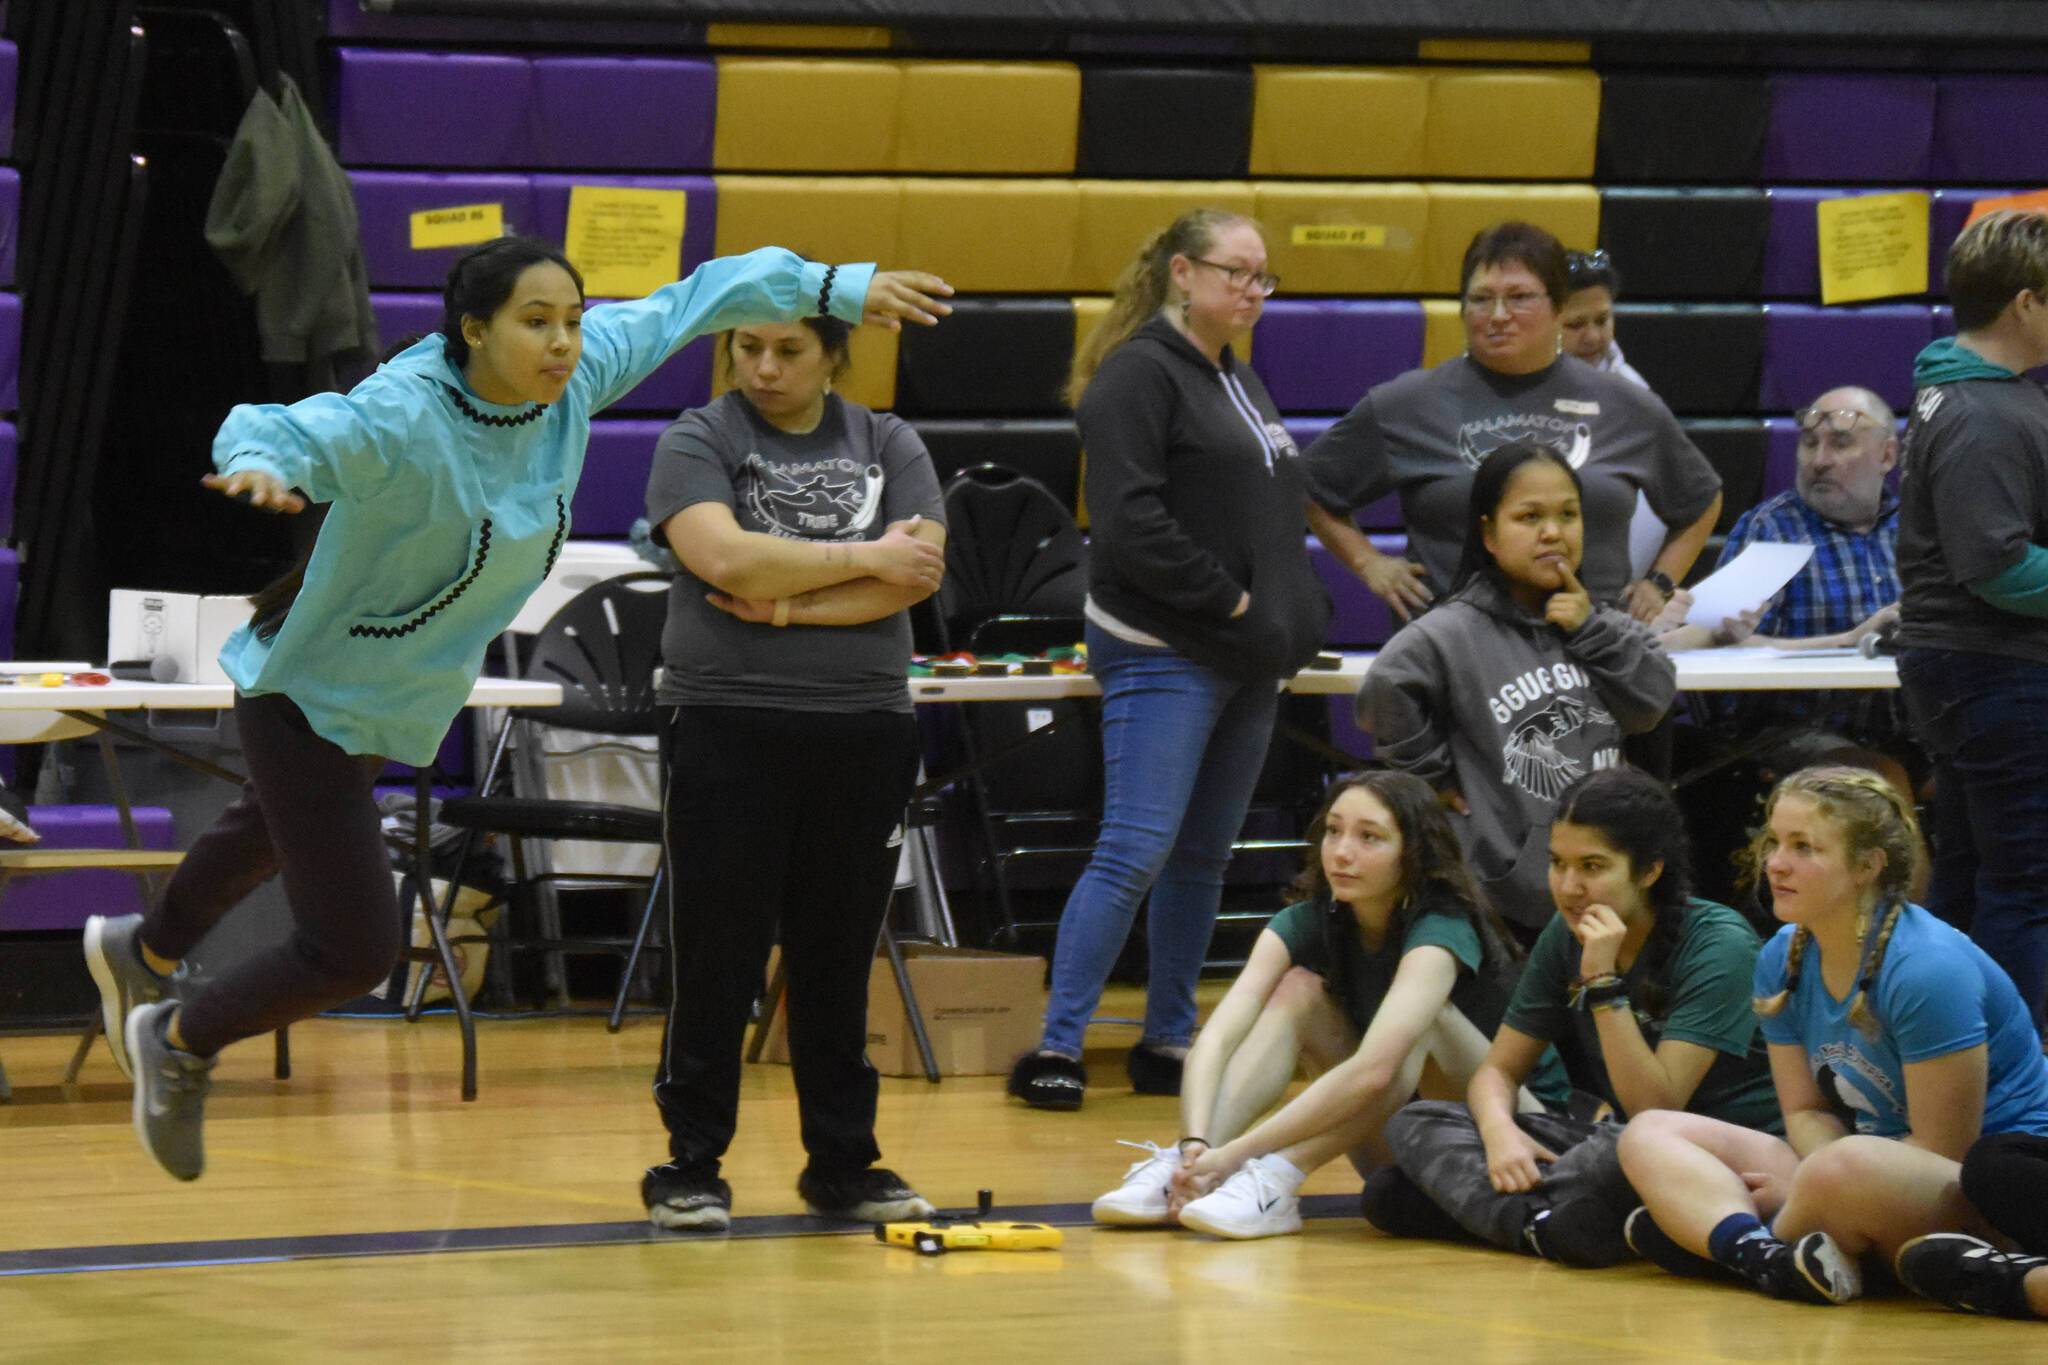 An athlete competing with the Salamatof Tribe leaps forward as she performs the Scissor Broad Jump during the Salamatof Tribe Traditional Native Games Invitational at Kenai Middle School in Kenai, Alaska, on Friday, April 14, 2023. (Jake Dye/Peninsula Clarion)